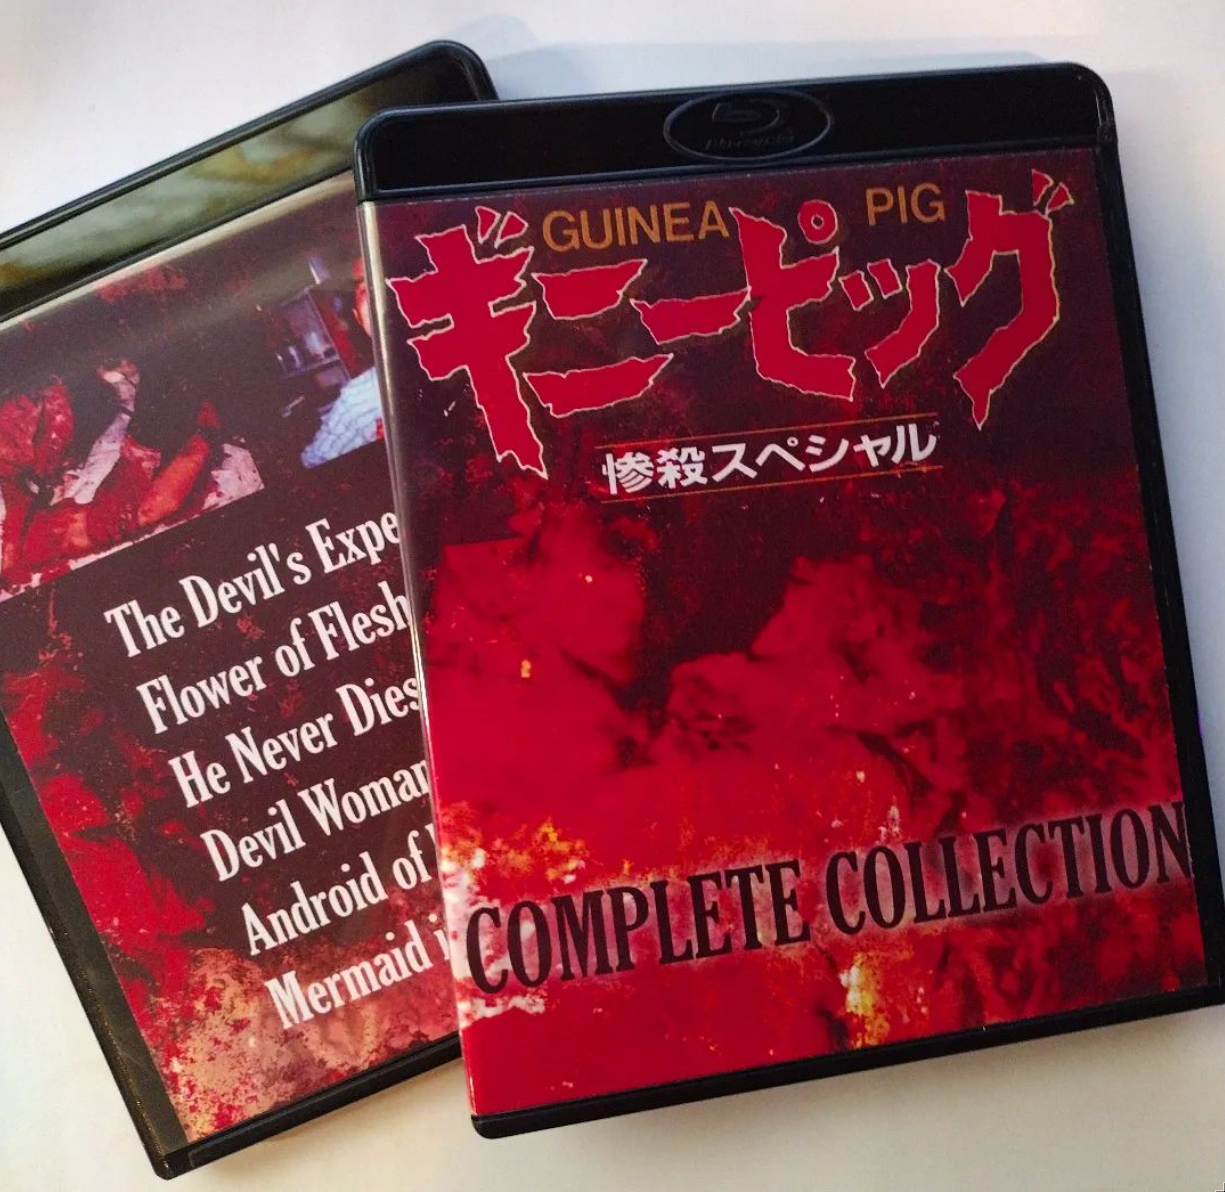 Guinea Pig Complete Film Collection 1-6 on Single Region Free 